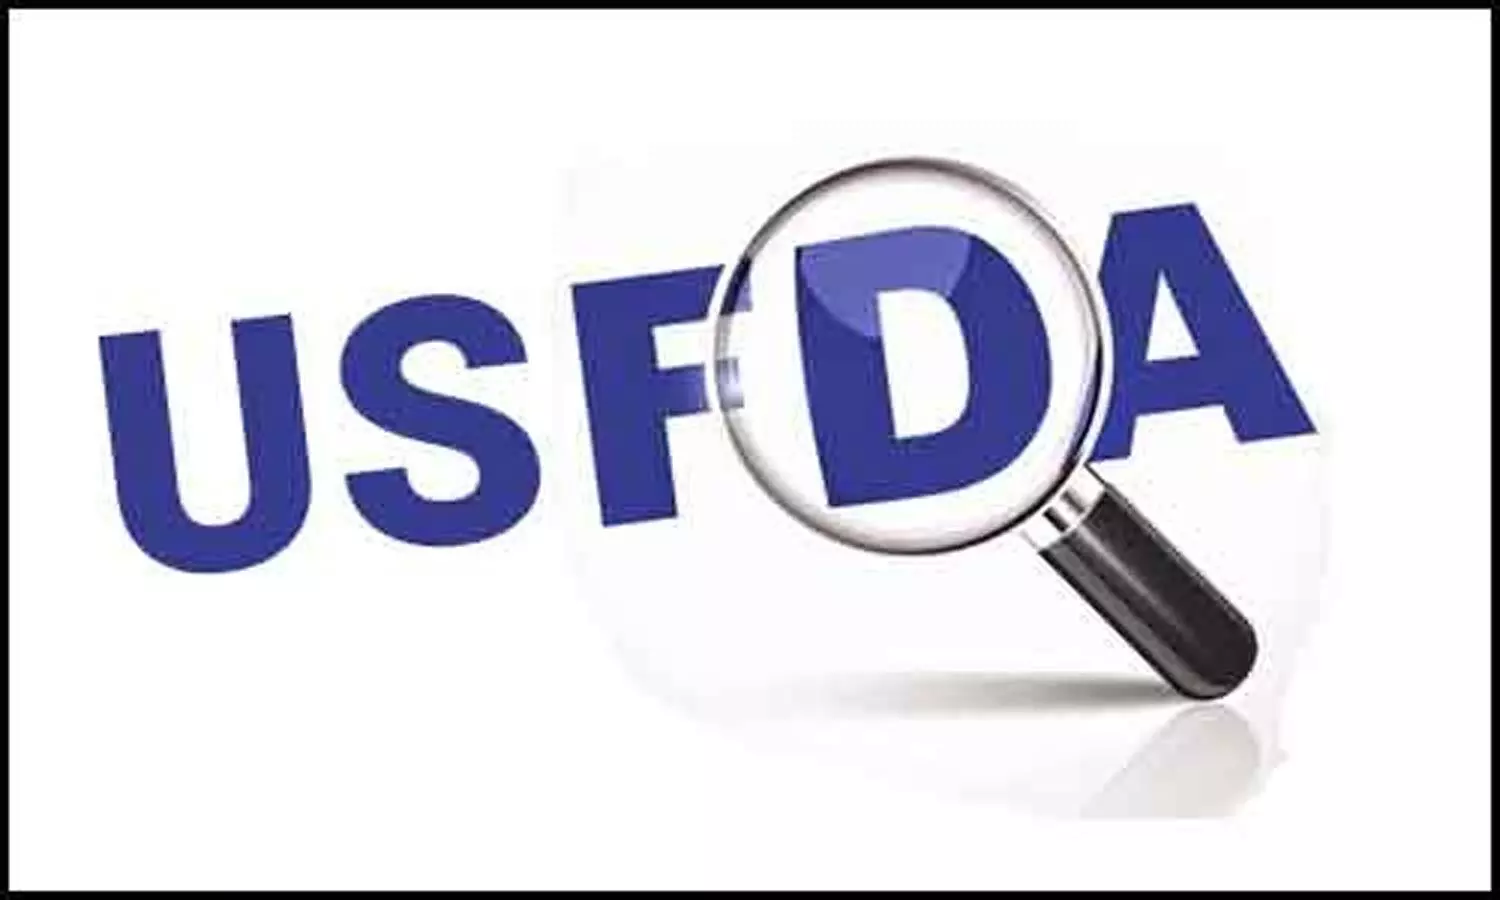 USFDA adds strict safety warnings on Pfizer, AbbVie, Lilly arthritis drugs